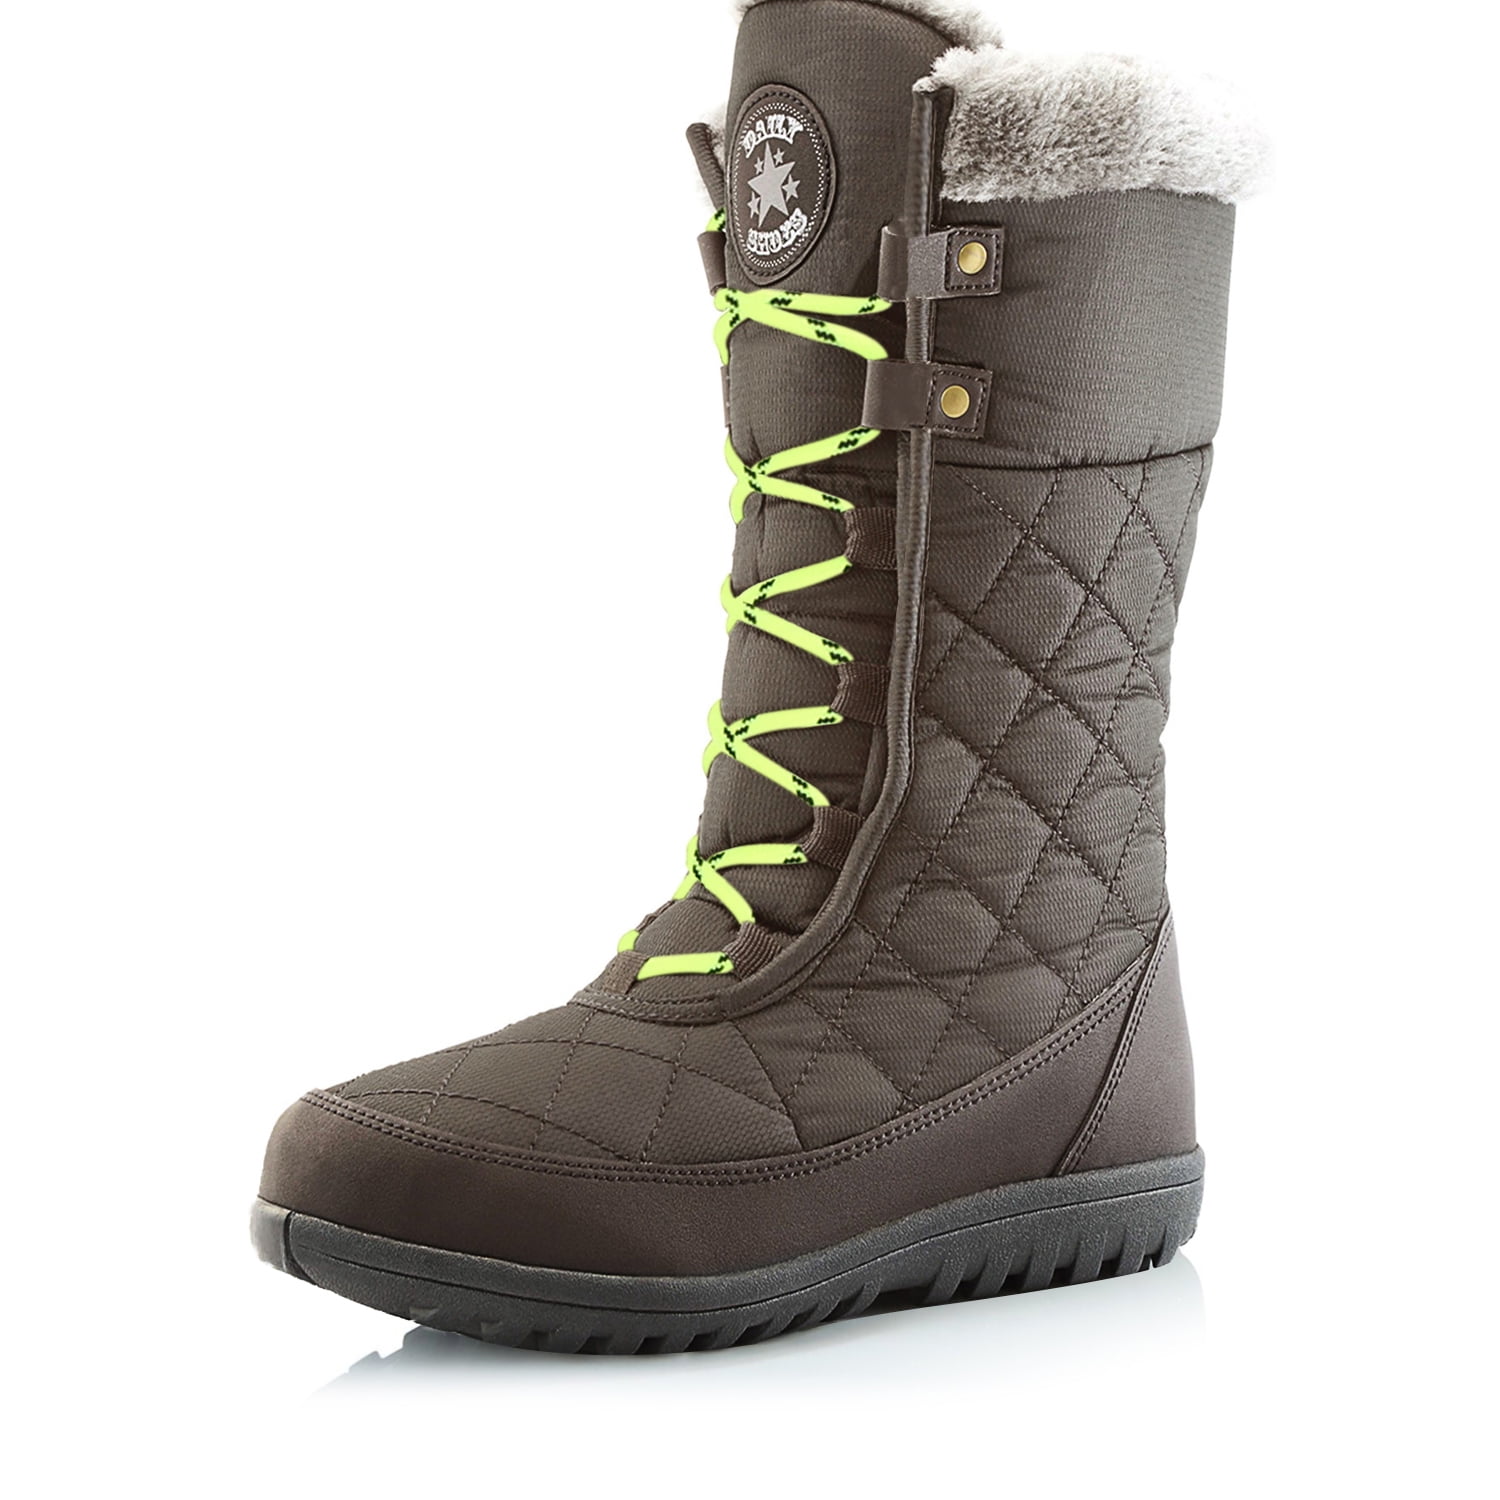 winter boots for women near me